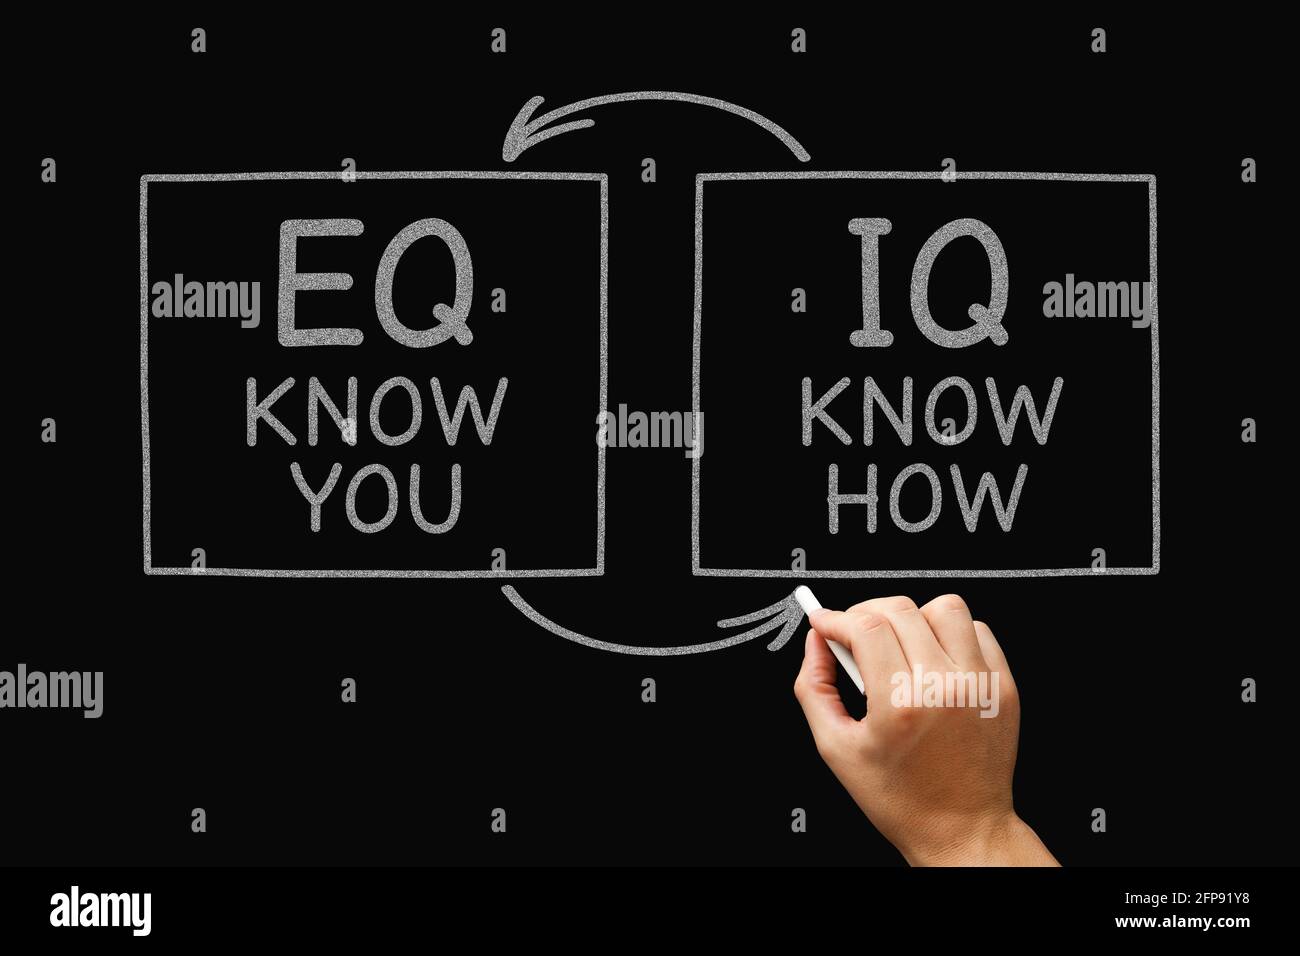 Hand writing Intelligence quotient and Emotional intelligence quotient diagram with chalk on blackboard. Know How IQ and Know You EQ concept. Stock Photo